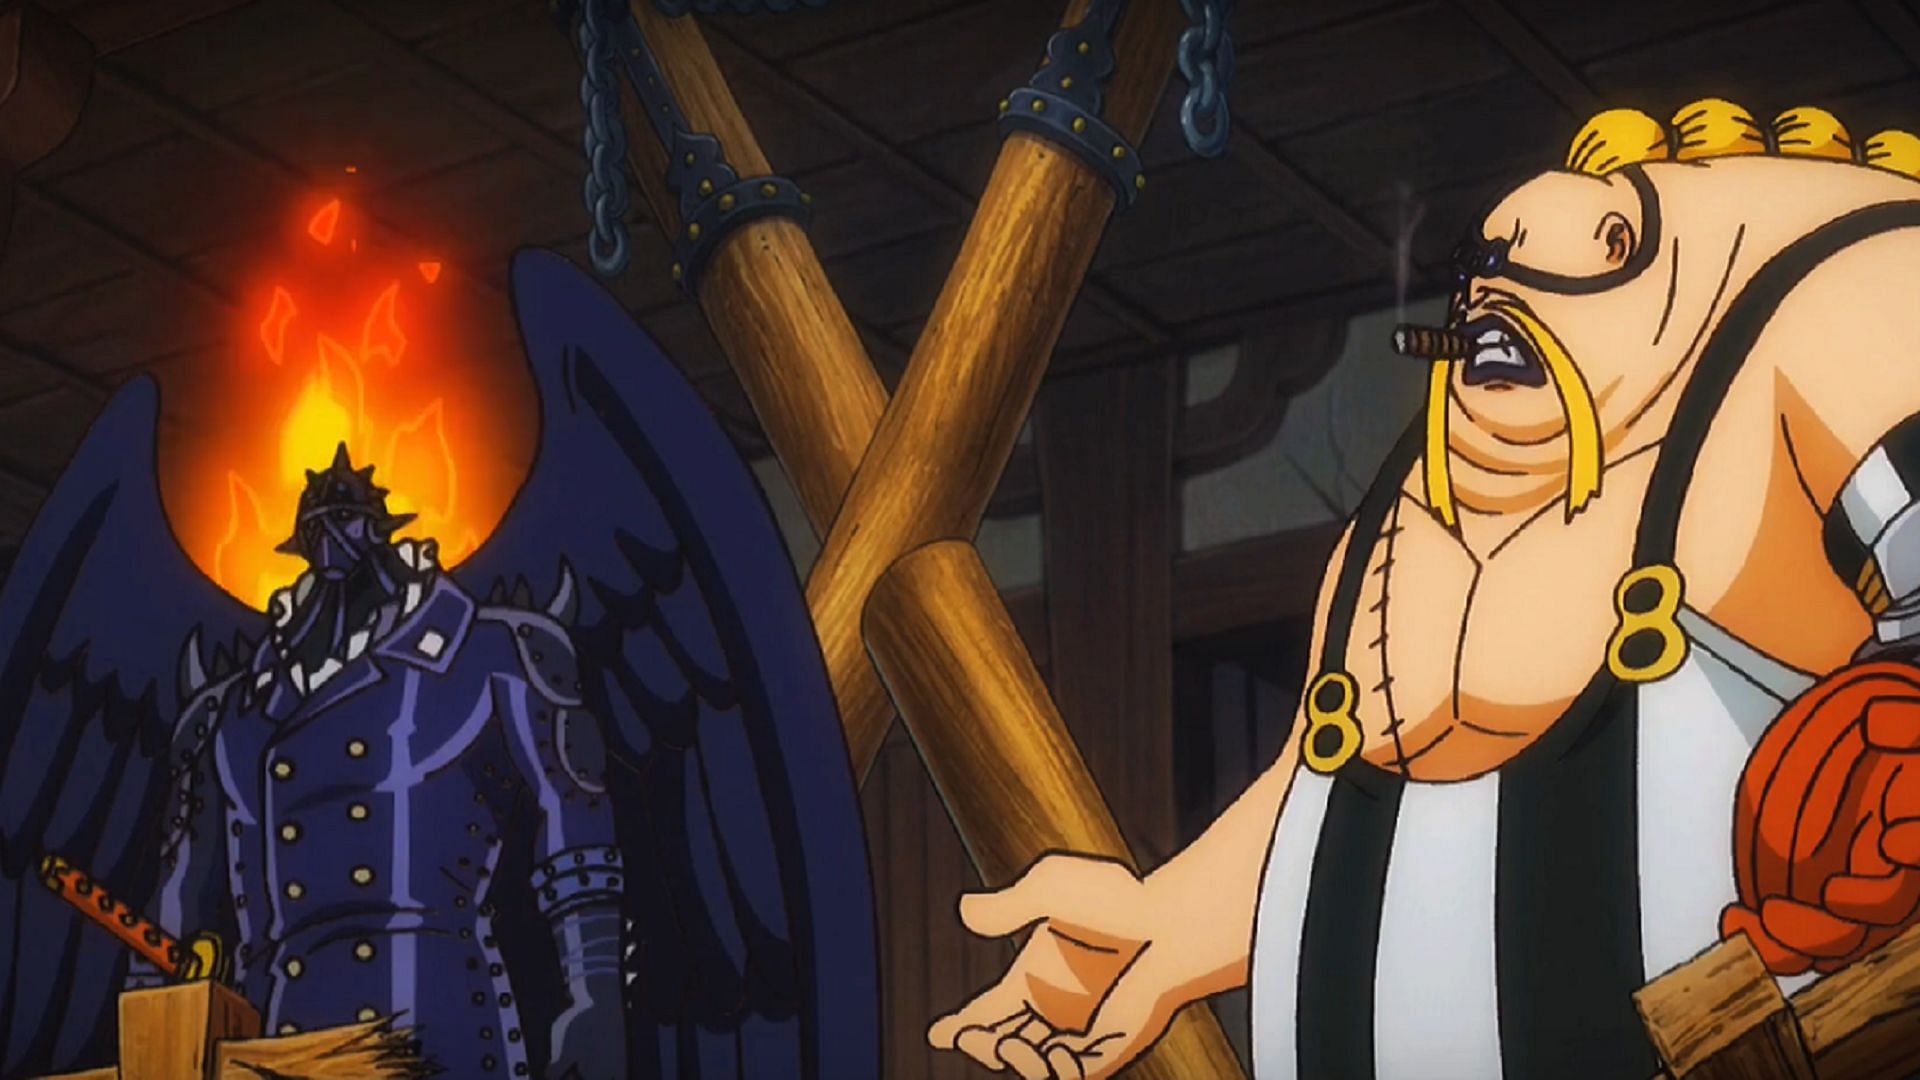 Out of all the gags, even Queen knows that King is a superior individual to him (Image via Toei Animation, One Piece)